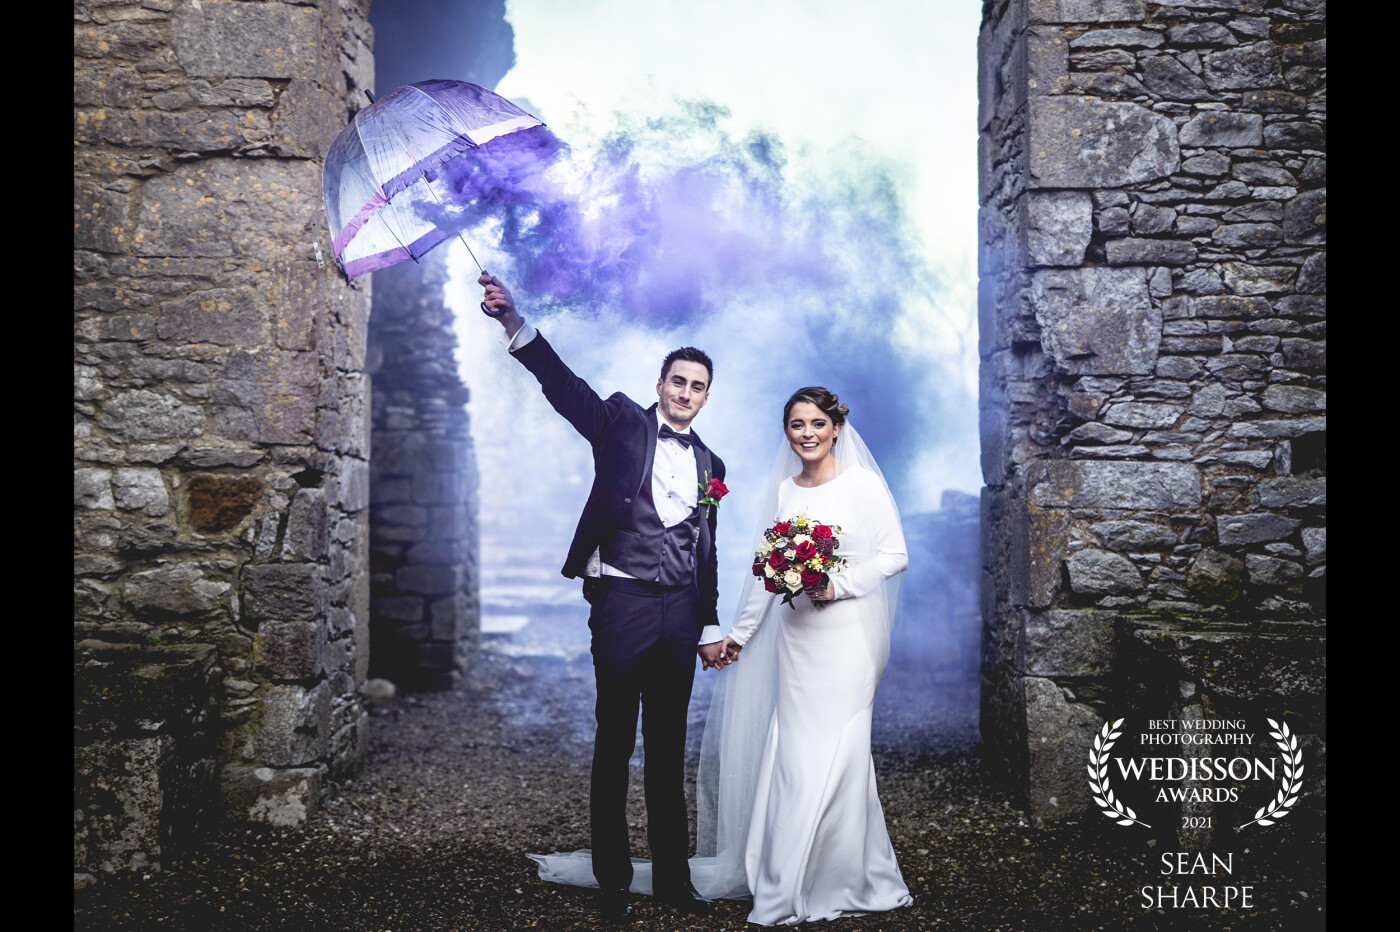 Another Covid wedding shot at Castlelyons Abbey, Co. Cork featuring an umbrella strapped with a smoke flare. Such an amazing day with Emma and Brian!